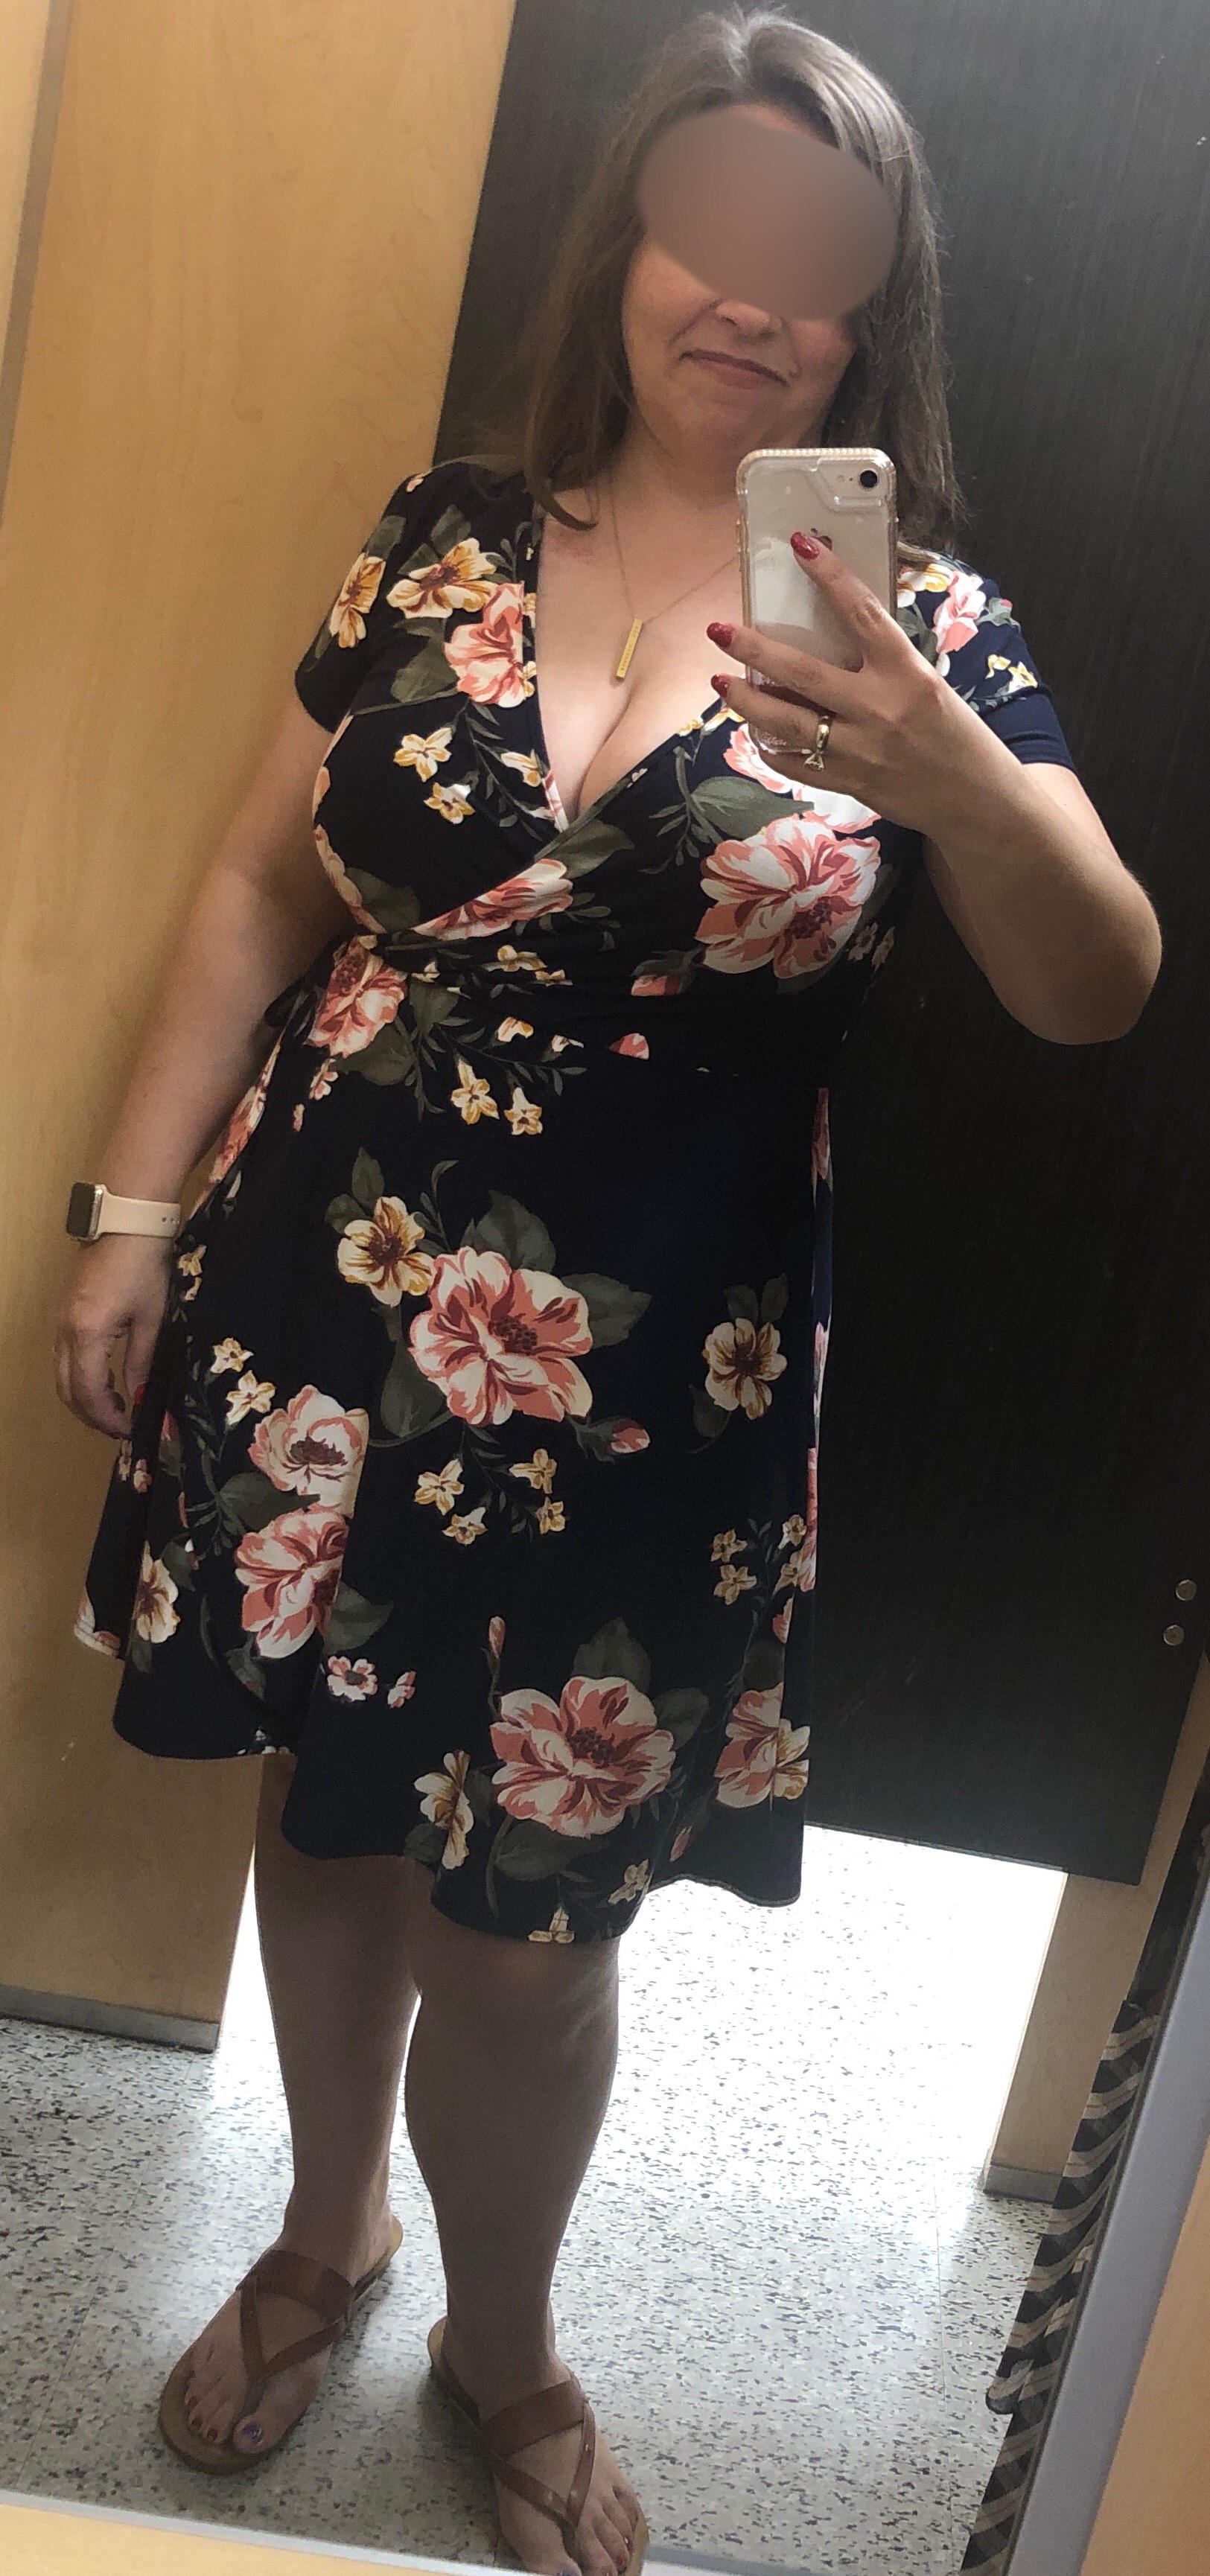 Mom o[f] 3... what do you think about this dress on her? Comments and PMs welcome!